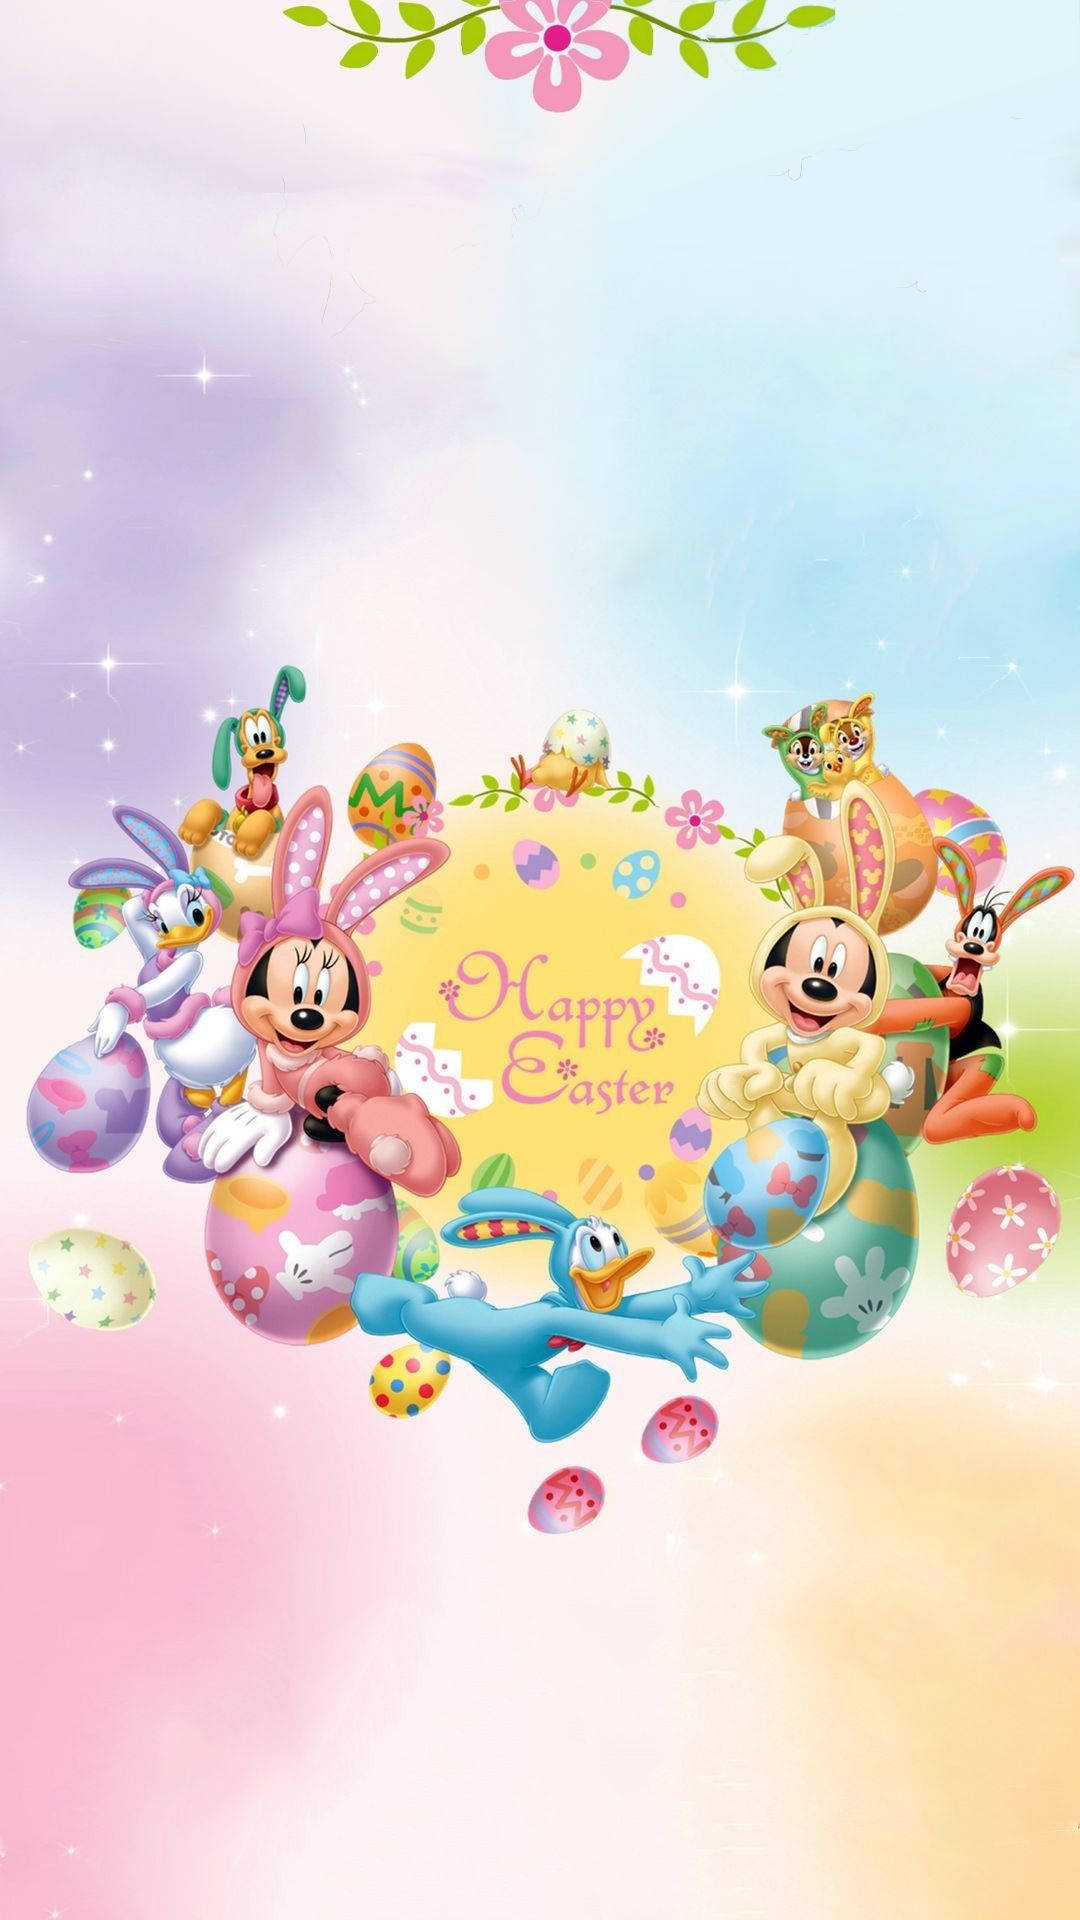 Mickeymouse Clubhouse Fröhliche Ostern Poster Wallpaper